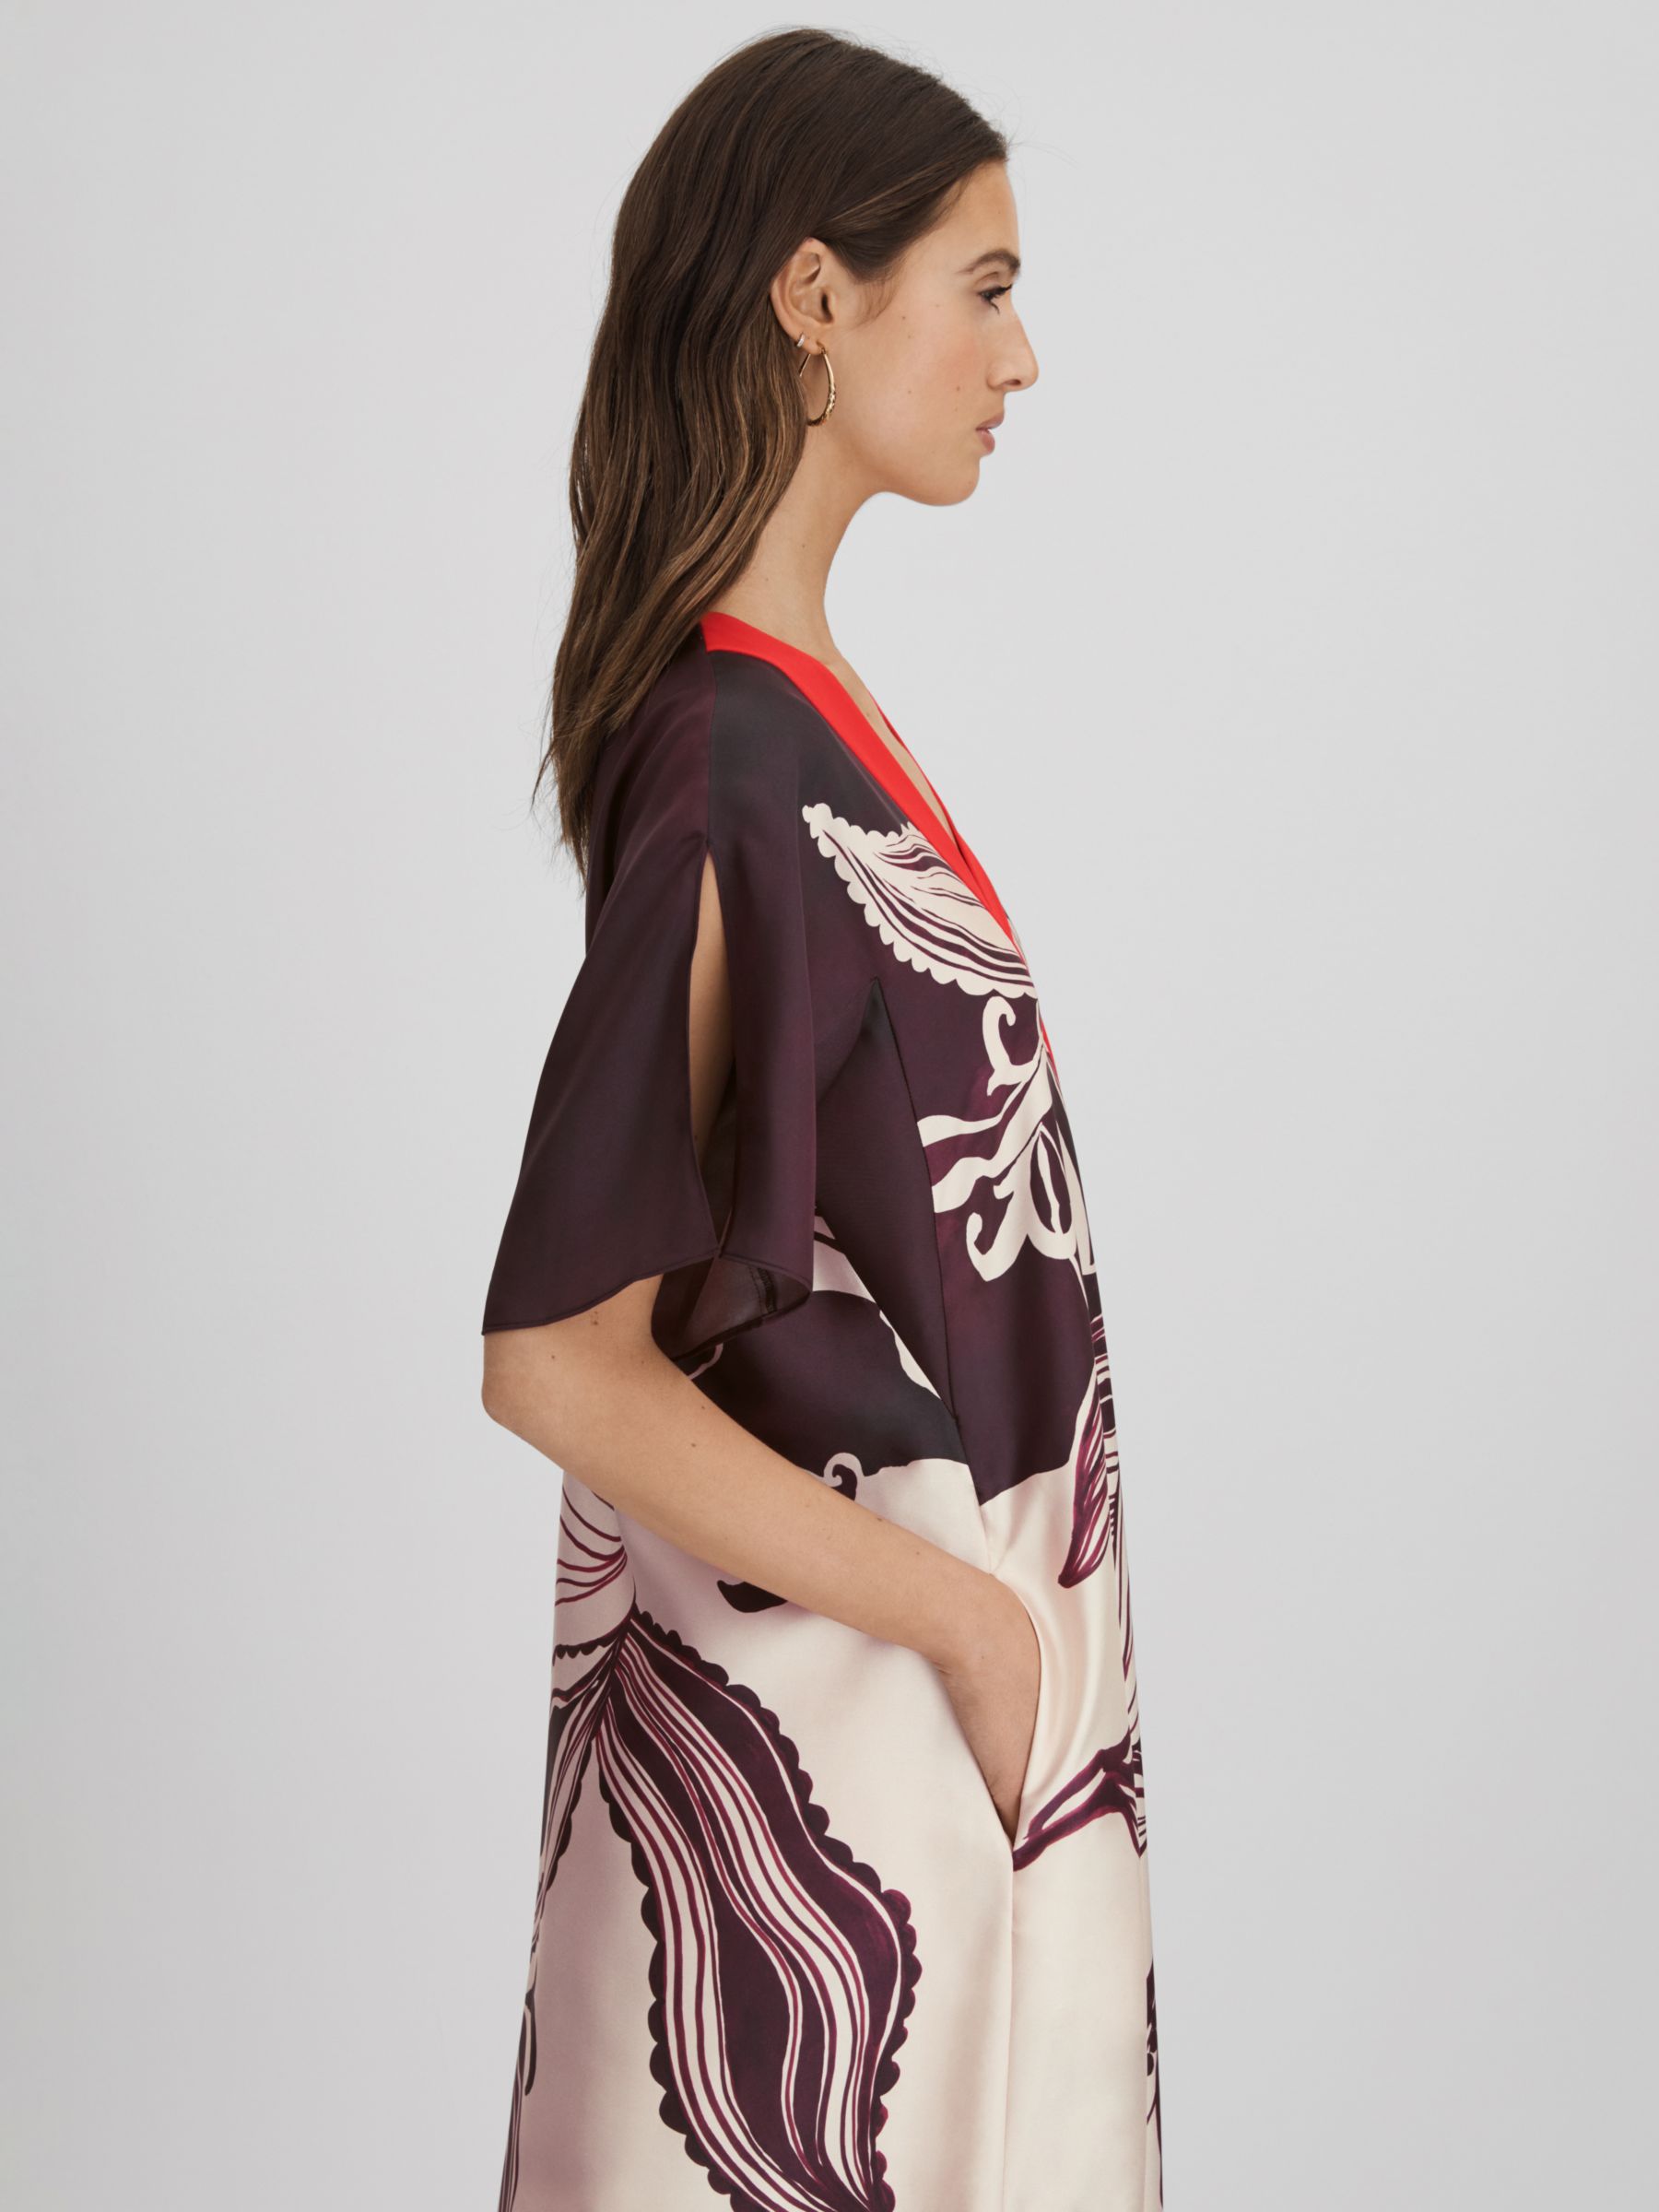 Buy Reiss Hanna Abstract Orchid Print Relaxed Dress, Burgundy/Multi Online at johnlewis.com